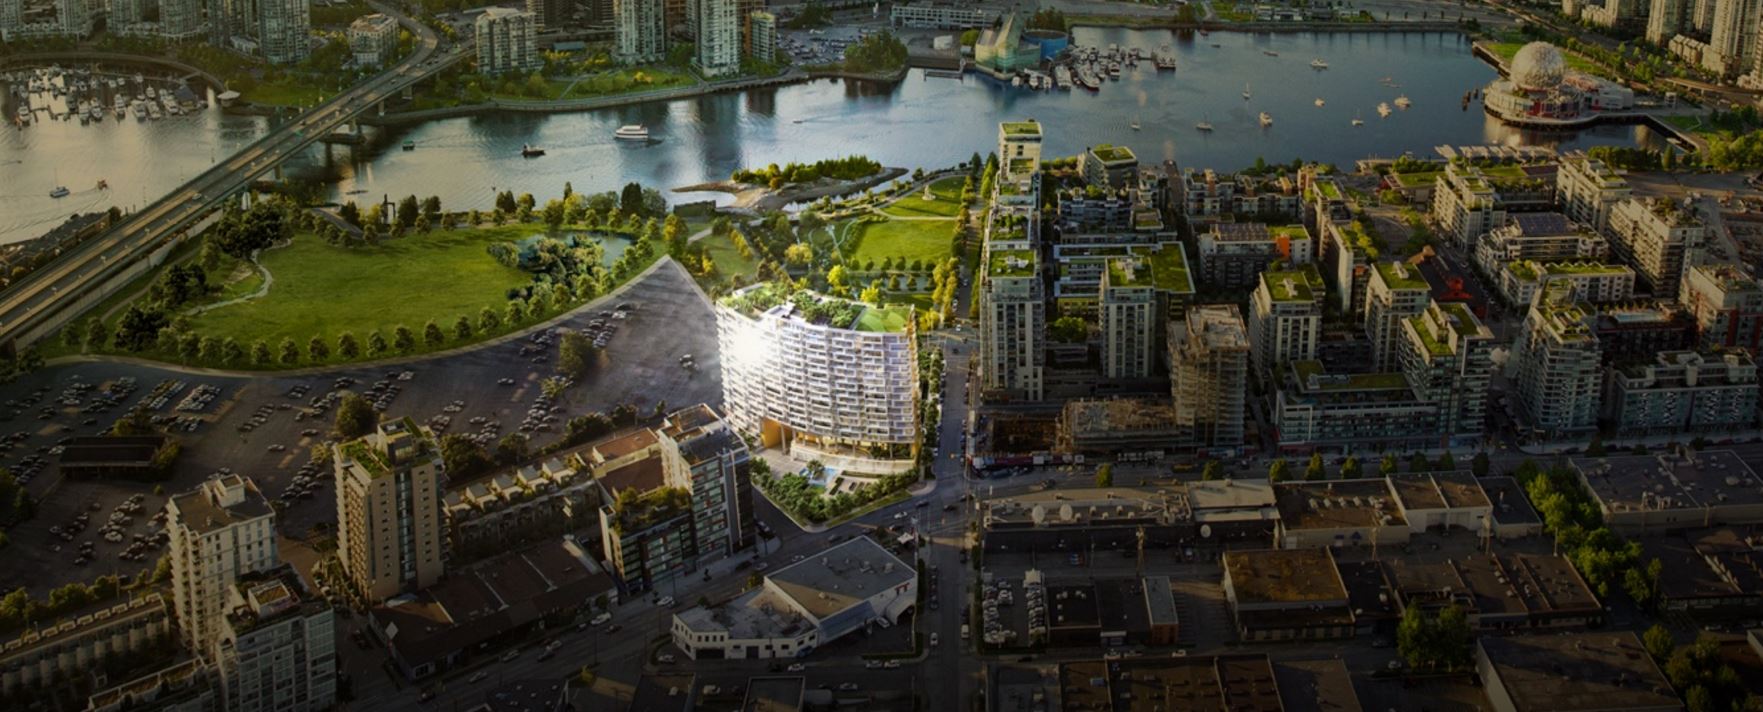 Aerial view of Area One's Southeast False Creek location.